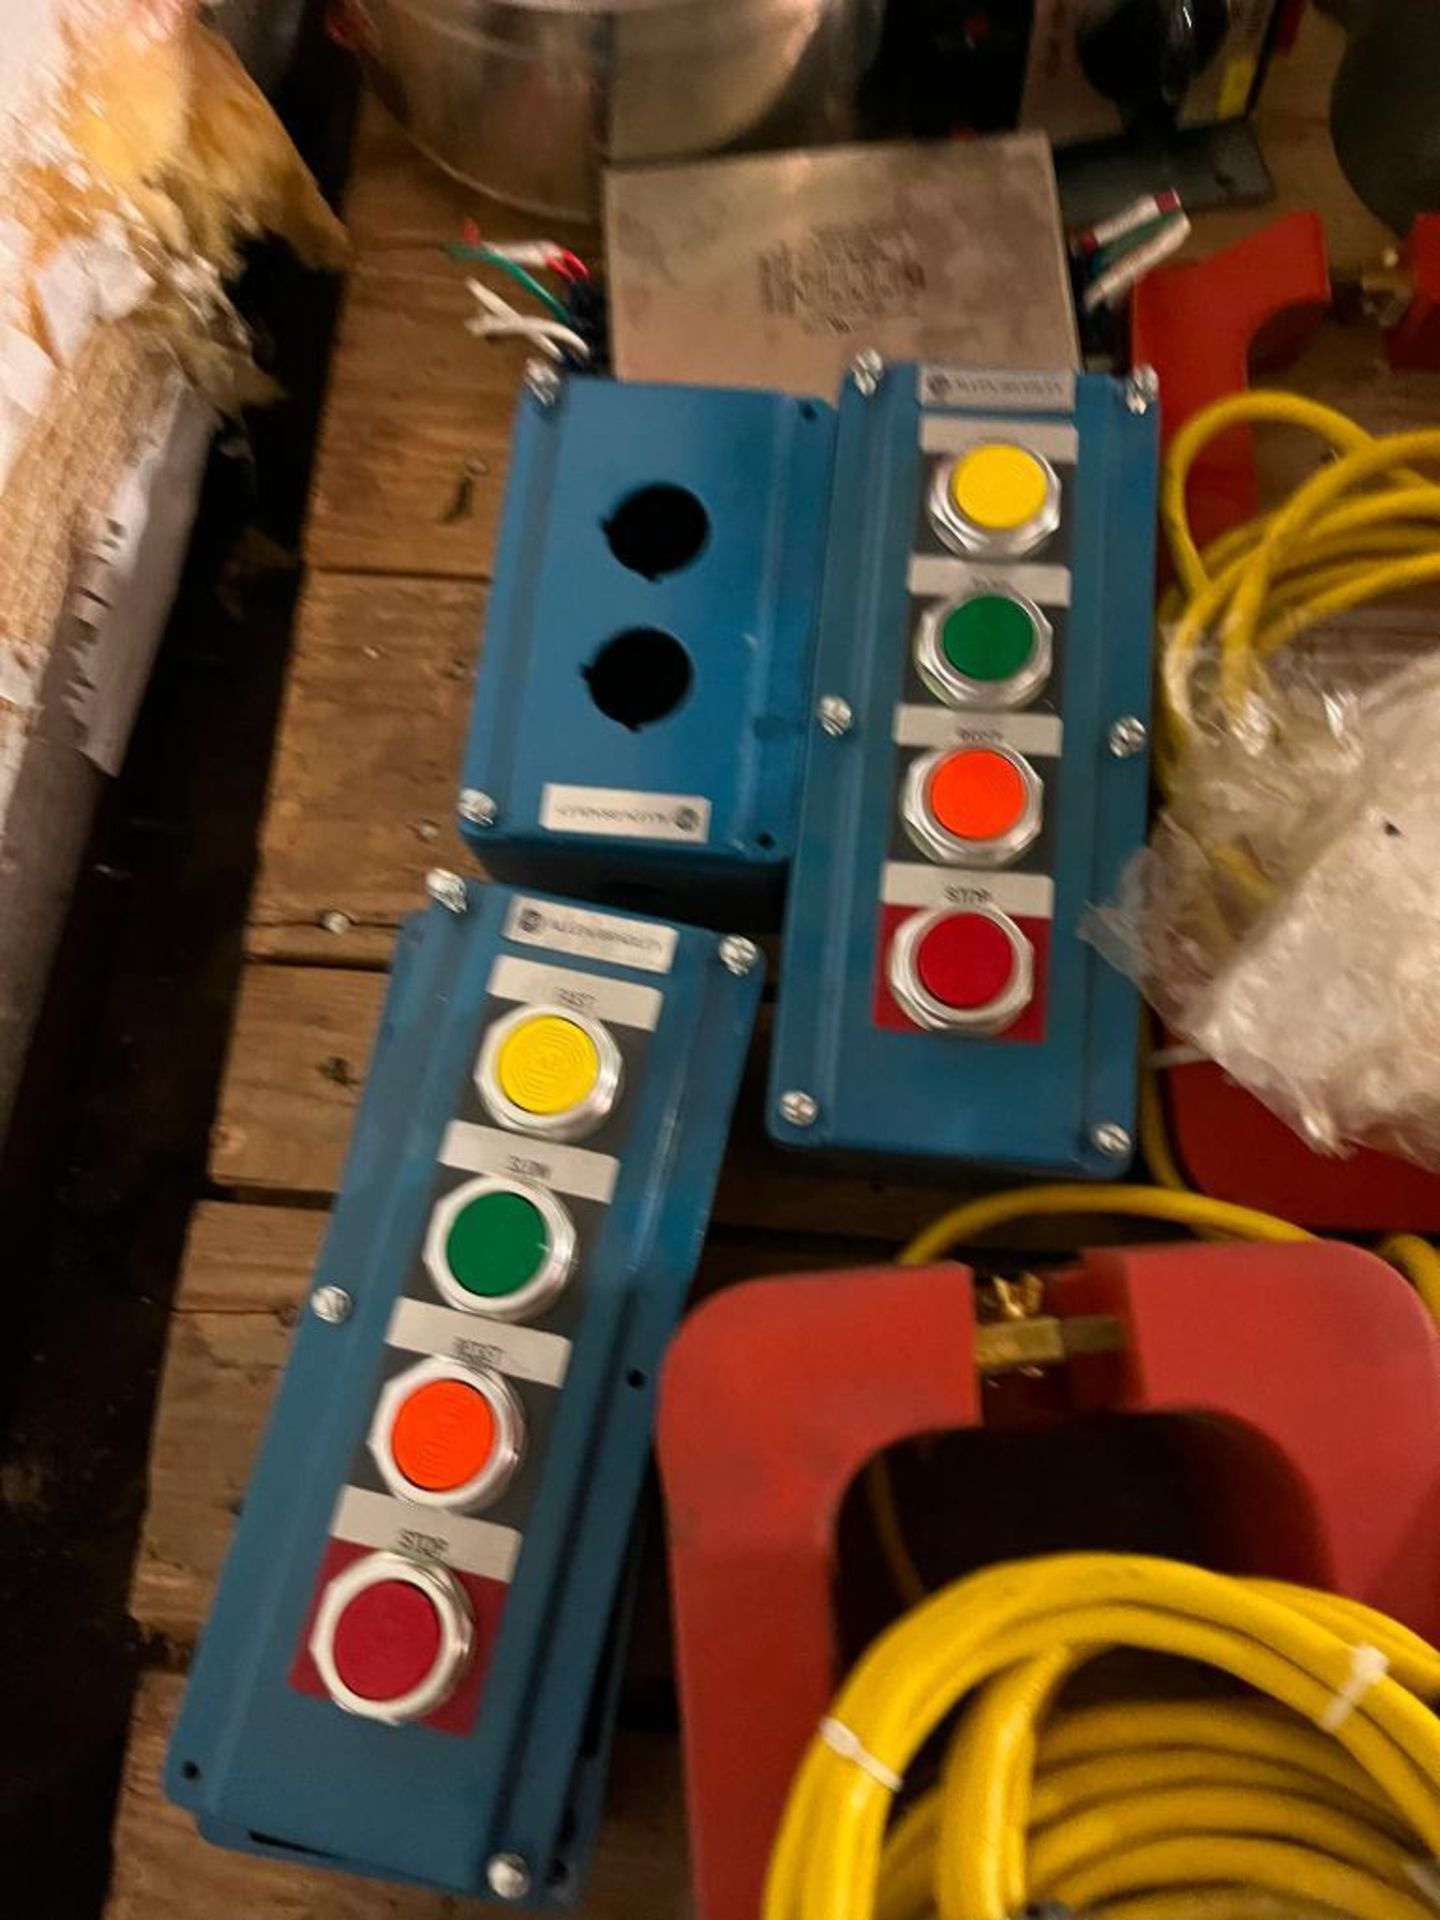 Skid Consisting of Assorted Control Panels, Light Fixtures, Industrial Intercoms - Image 6 of 11